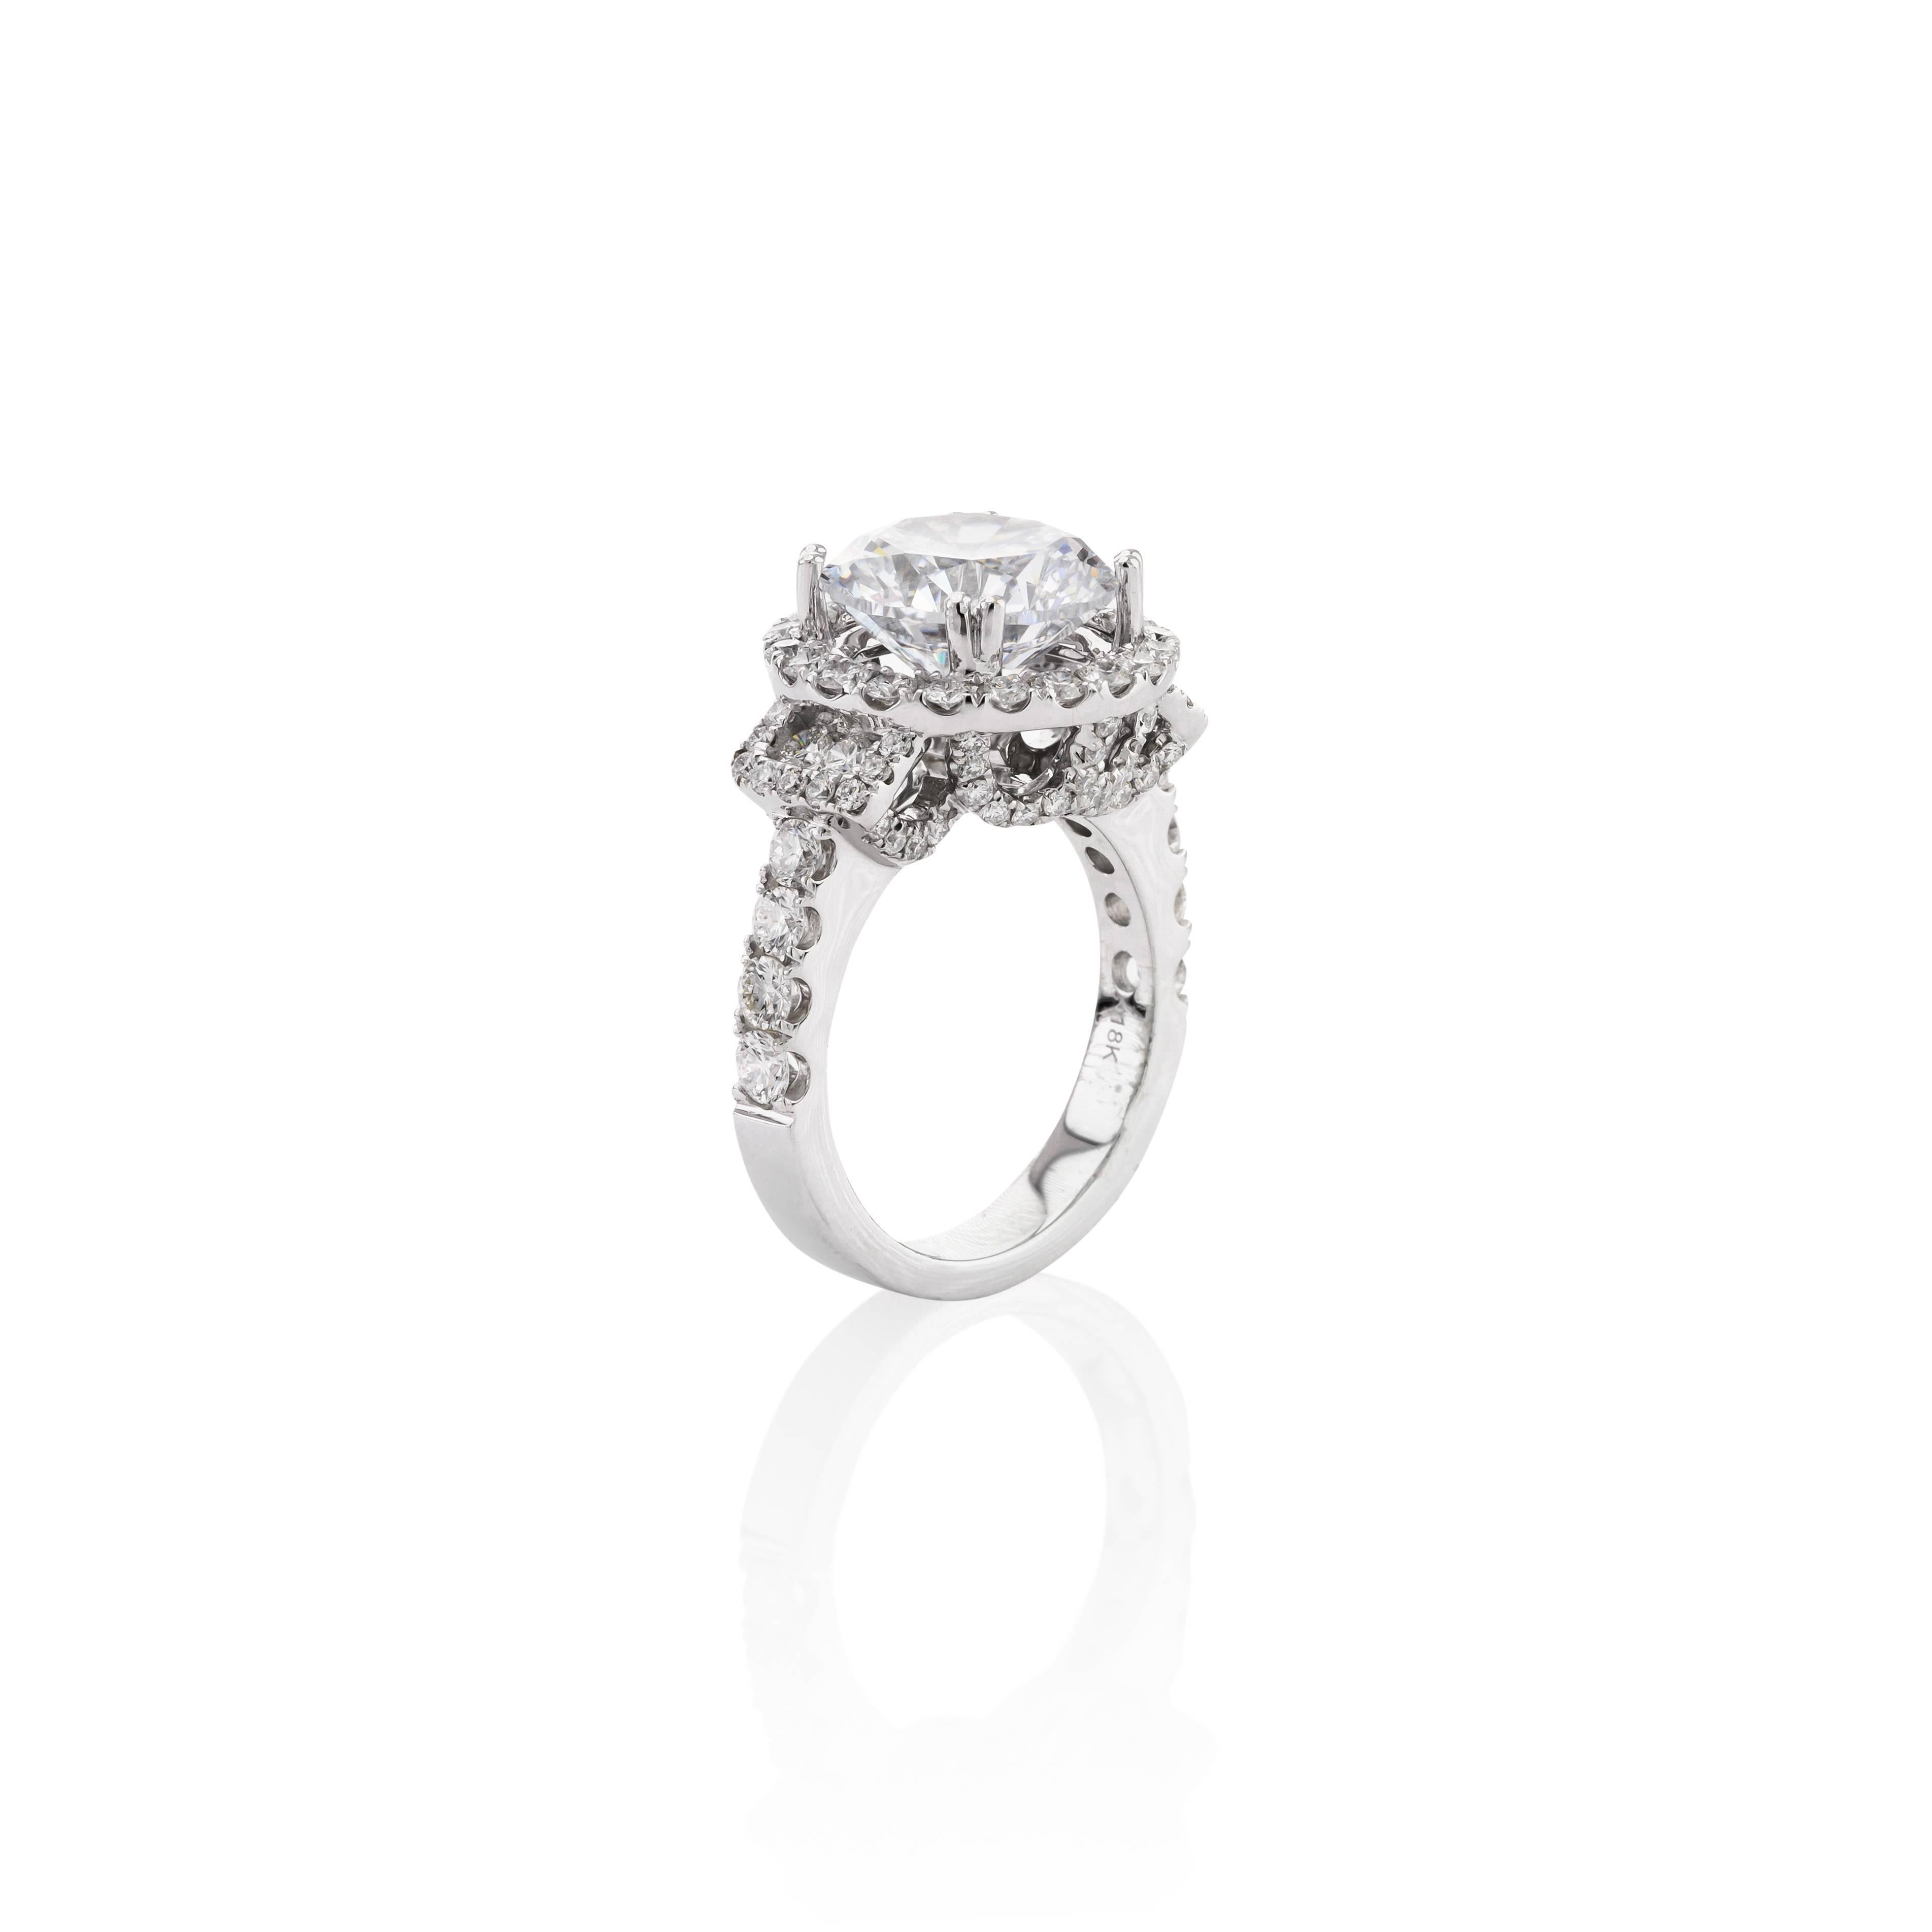 18K White Gold Semi-Mount Diamond Ring.  Has 1.80ctw Diamonds (fits 11.0mm center stone-roughly 4.9 ctw.)  Current Center Stone is CZ.  This is a definite statement piece.  